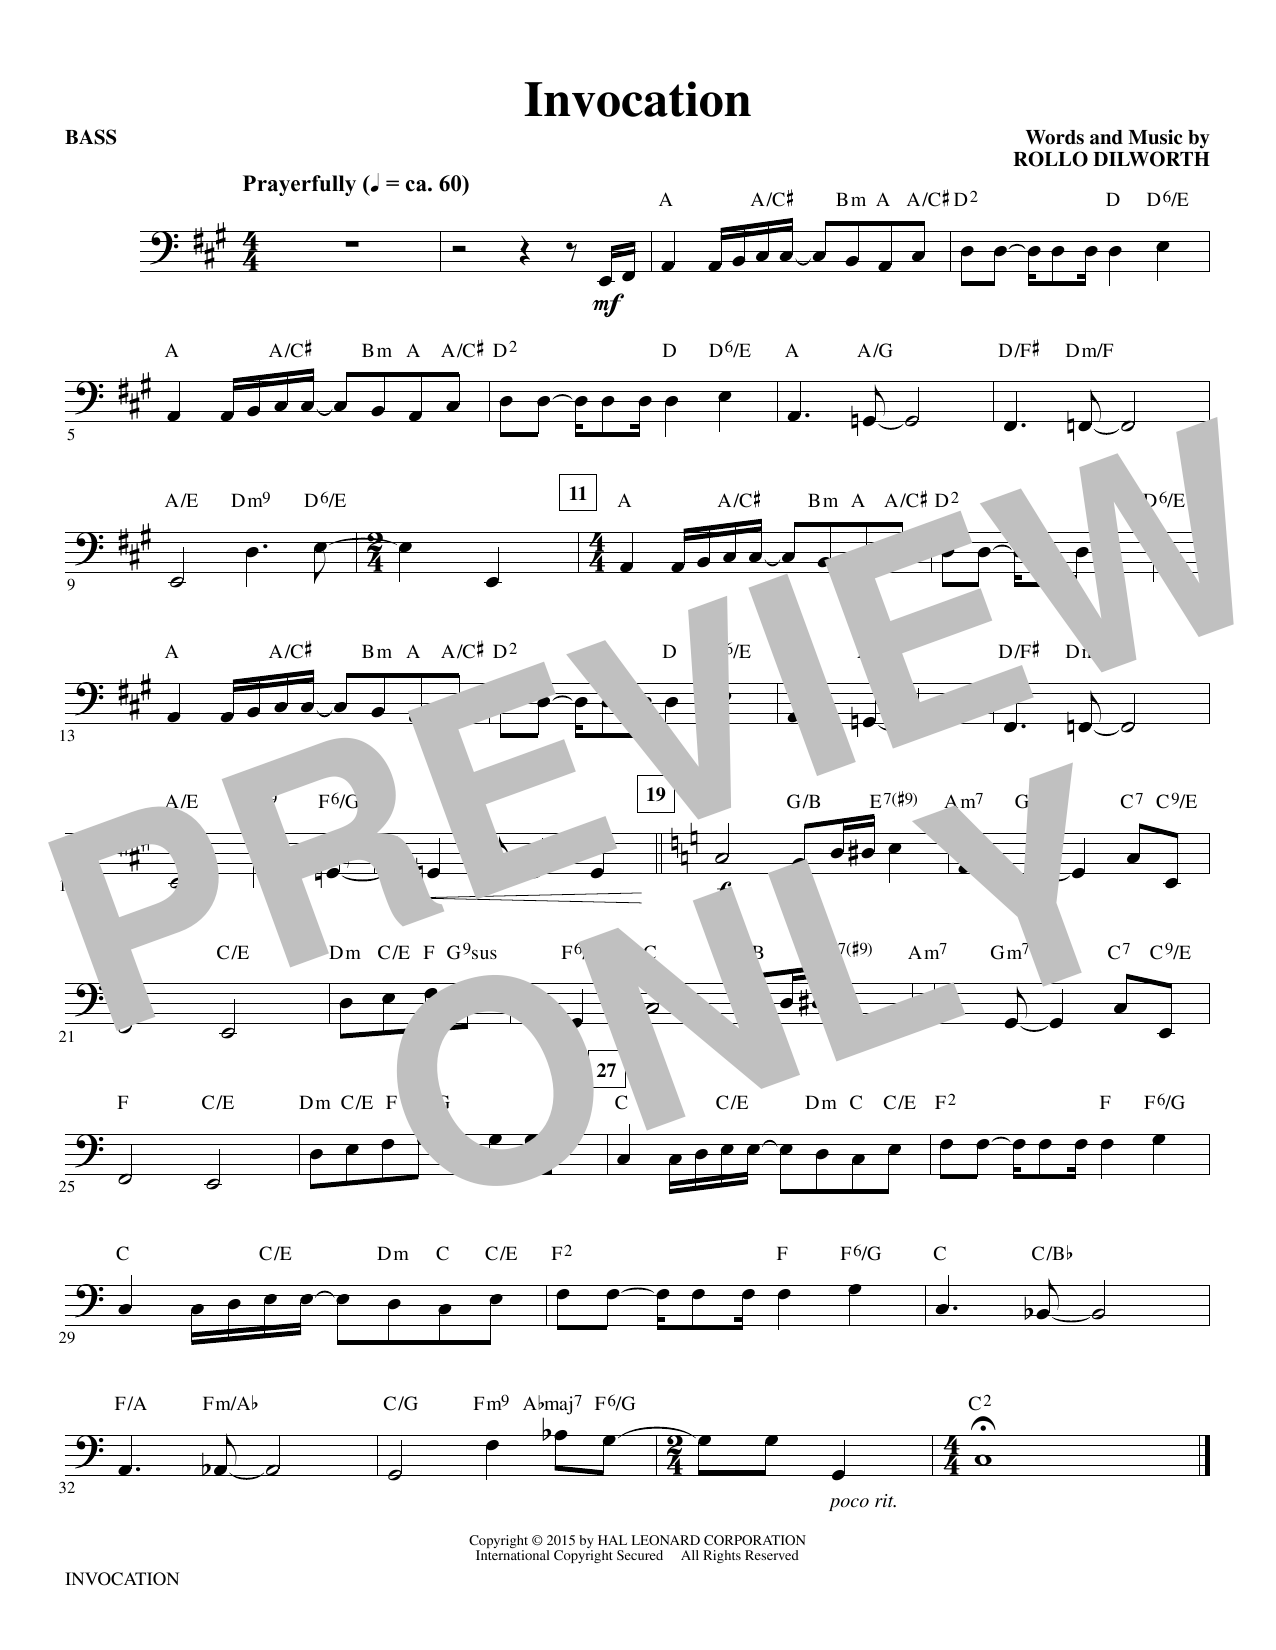 Rollo Dilworth Invocation - Bass sheet music notes and chords. Download Printable PDF.